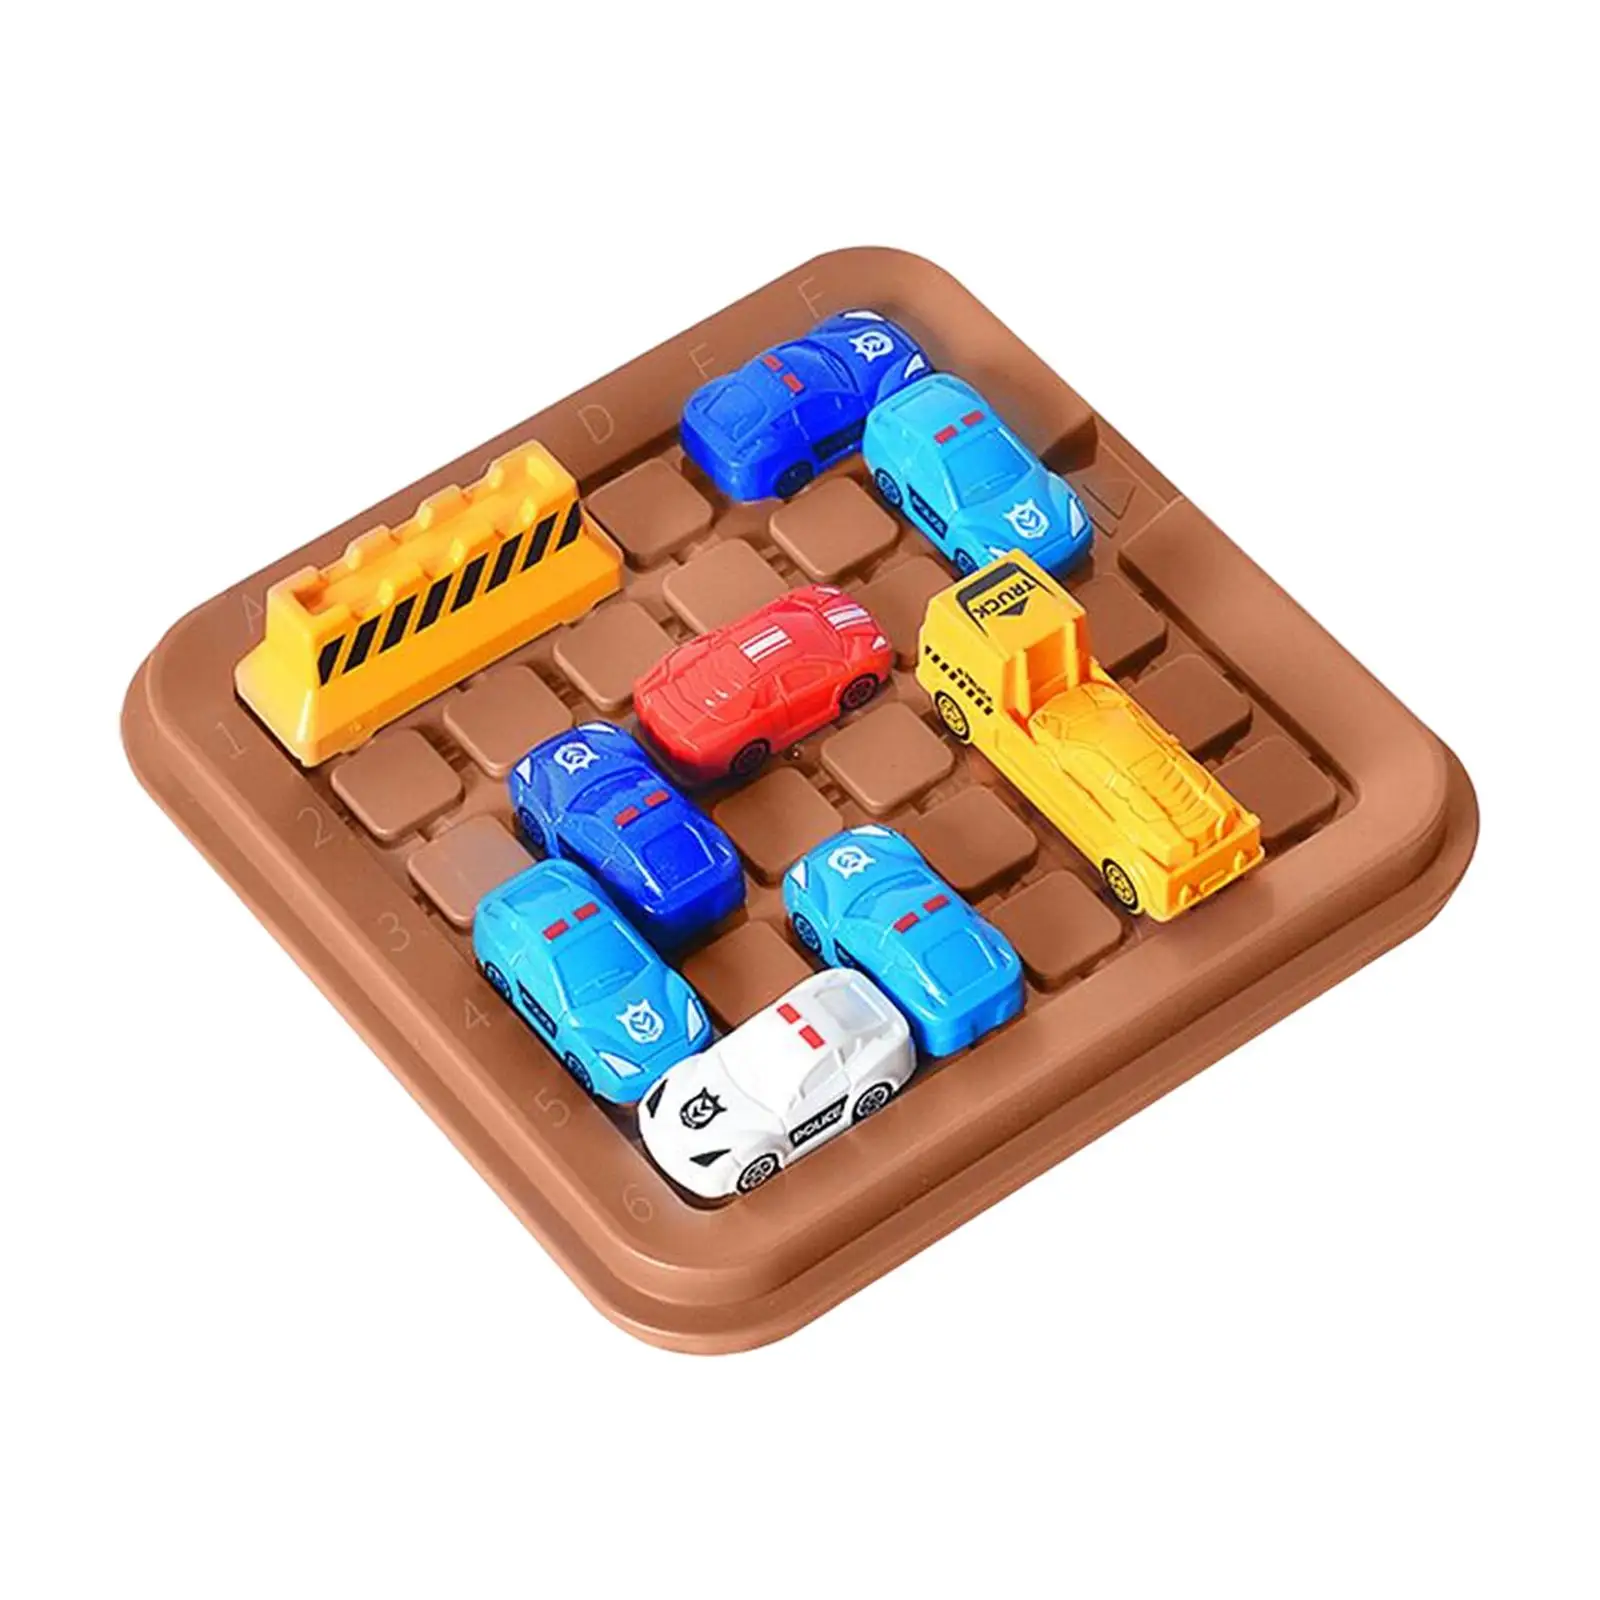 Montessori Slide Puzzle Games Educational Toys Intellectual Development Toys Parent Child Kids Gift Travel Games Fun for Travel